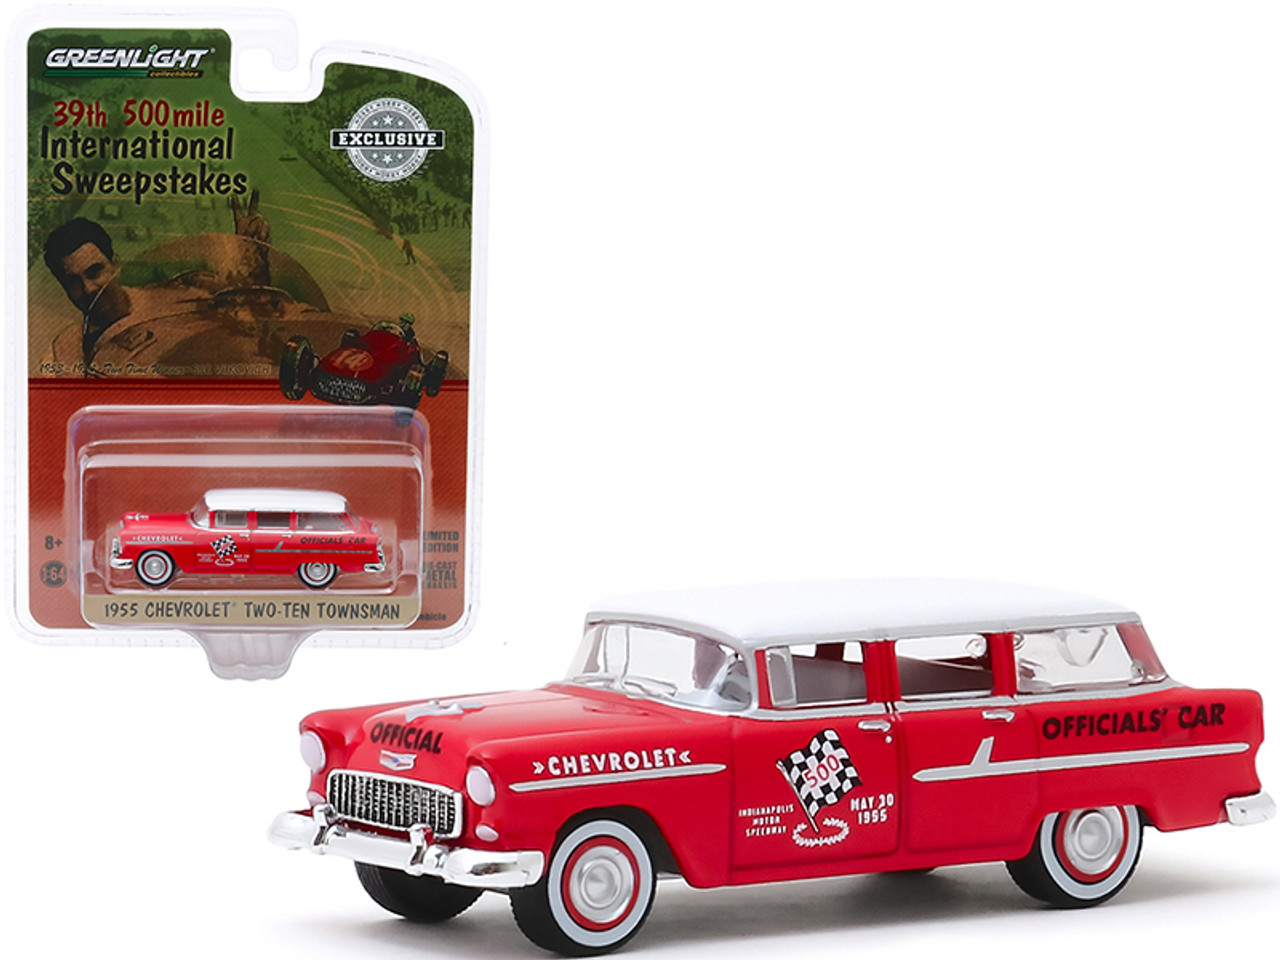 1955 Chevrolet Two-Ten Townsman Officials' Car Red with White Top "39th 500 Mile International Sweepstakes" "Hobby Exclusive" 1/64 Diecast Model Car by Greenlight